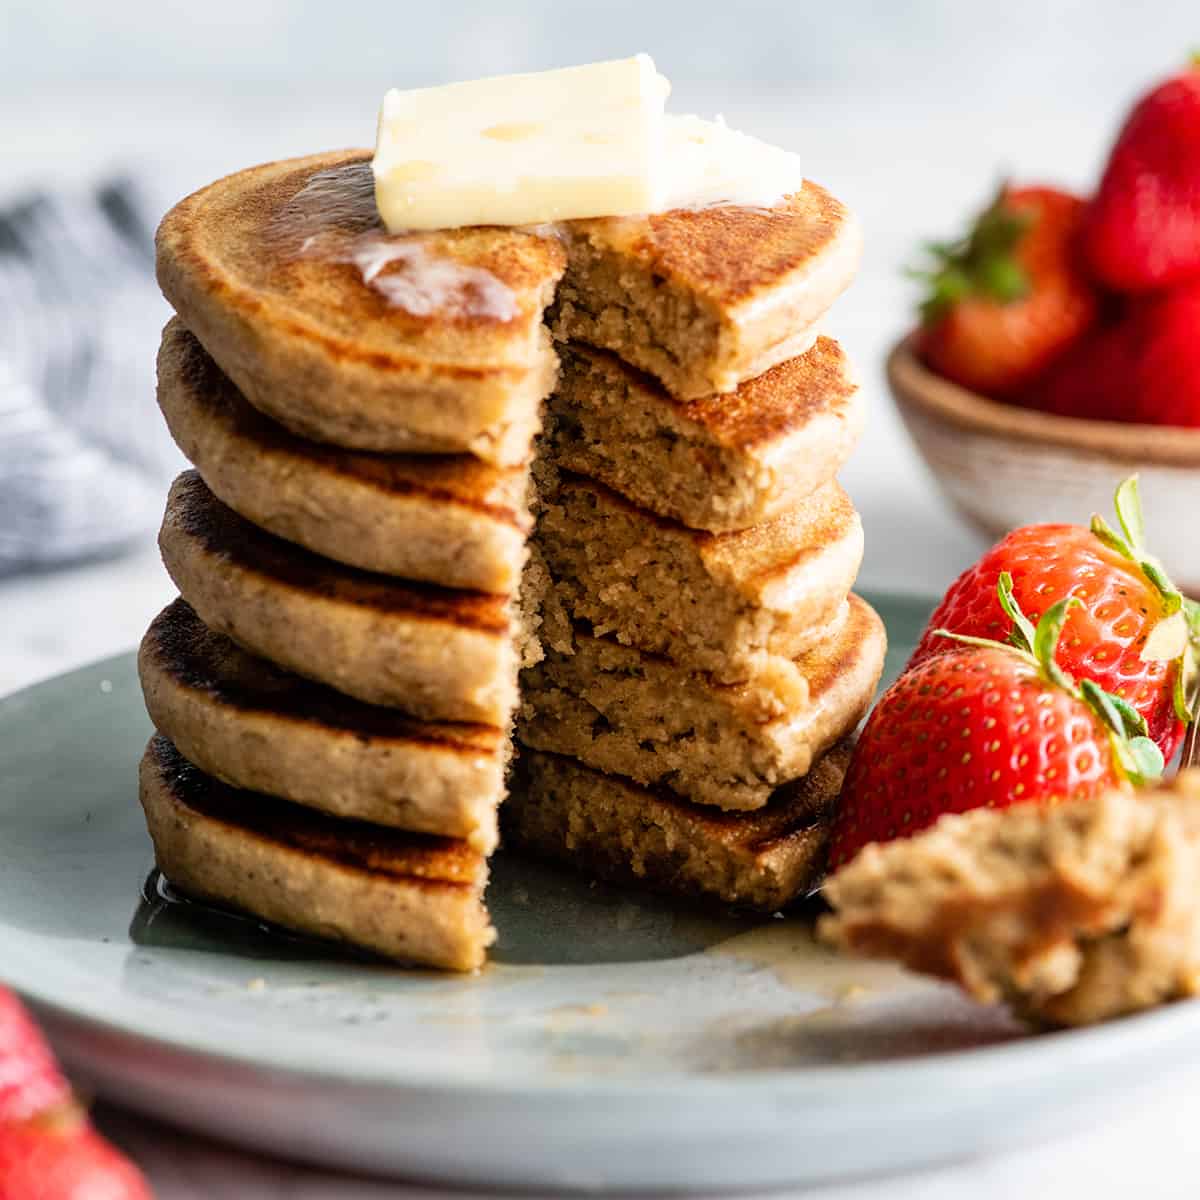 front view of a stack of 5 banana oat pancakes with butter and syrup and a piece cut out of the stack